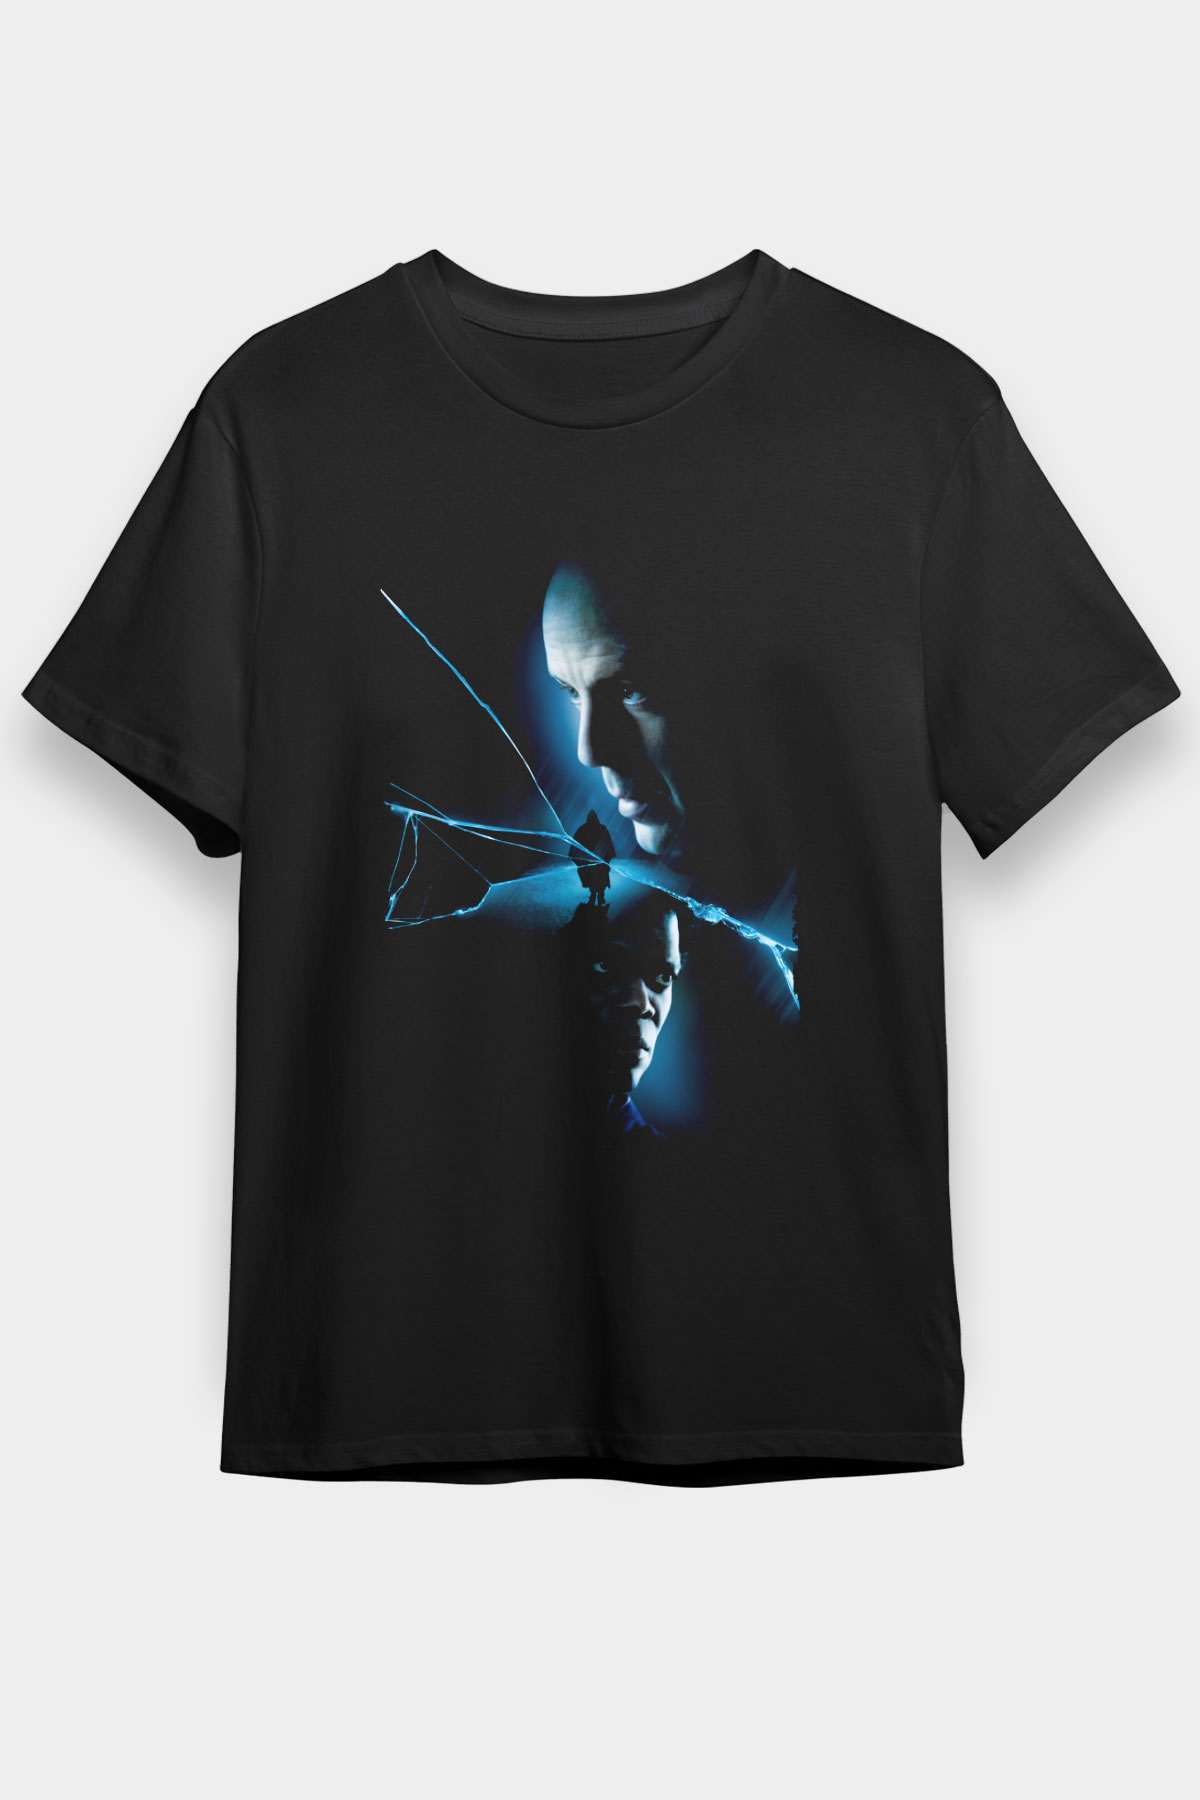 Unbreakable T shirt,Movie , Tv and Games Tshirt